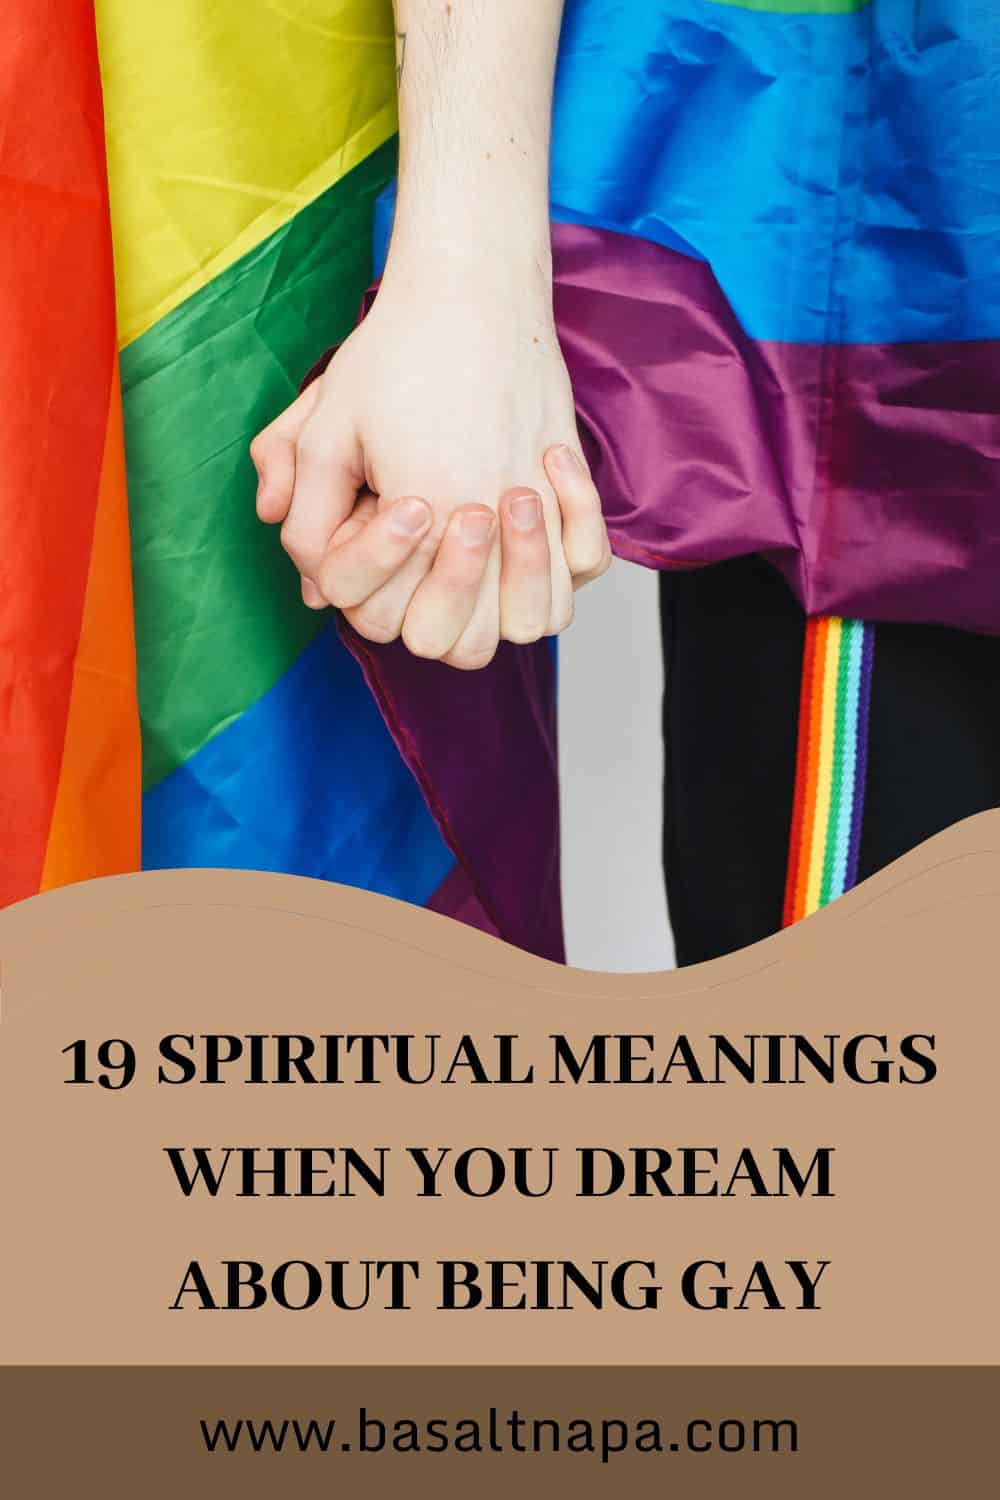 19 Spiritual Meanings When You Dream About Being Gay